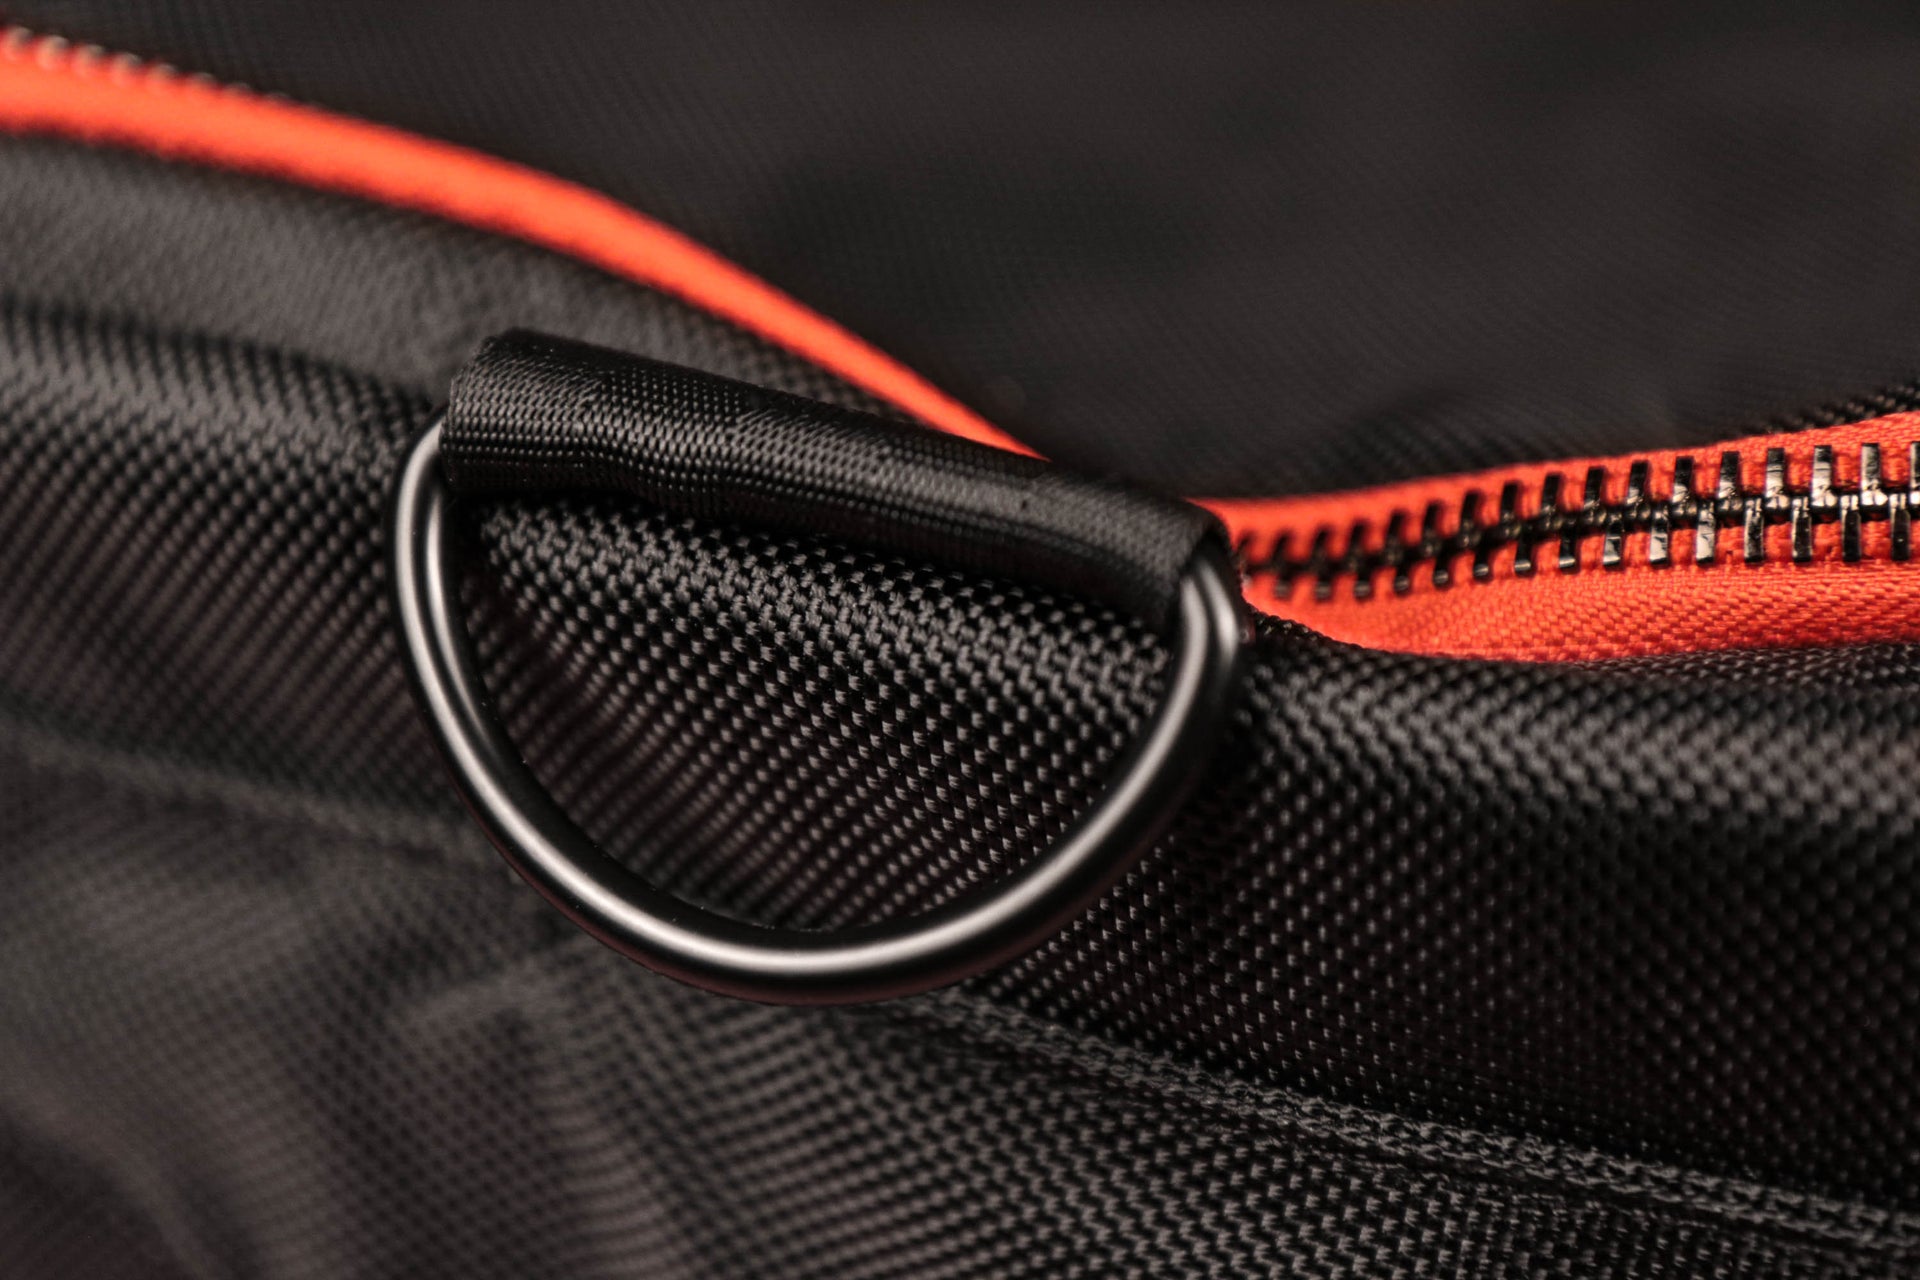 The attachable arm strap on the Flight Pack Sneaker Duffle Bag To Match Bred 11s | Sneaker Duffel Travel Bag